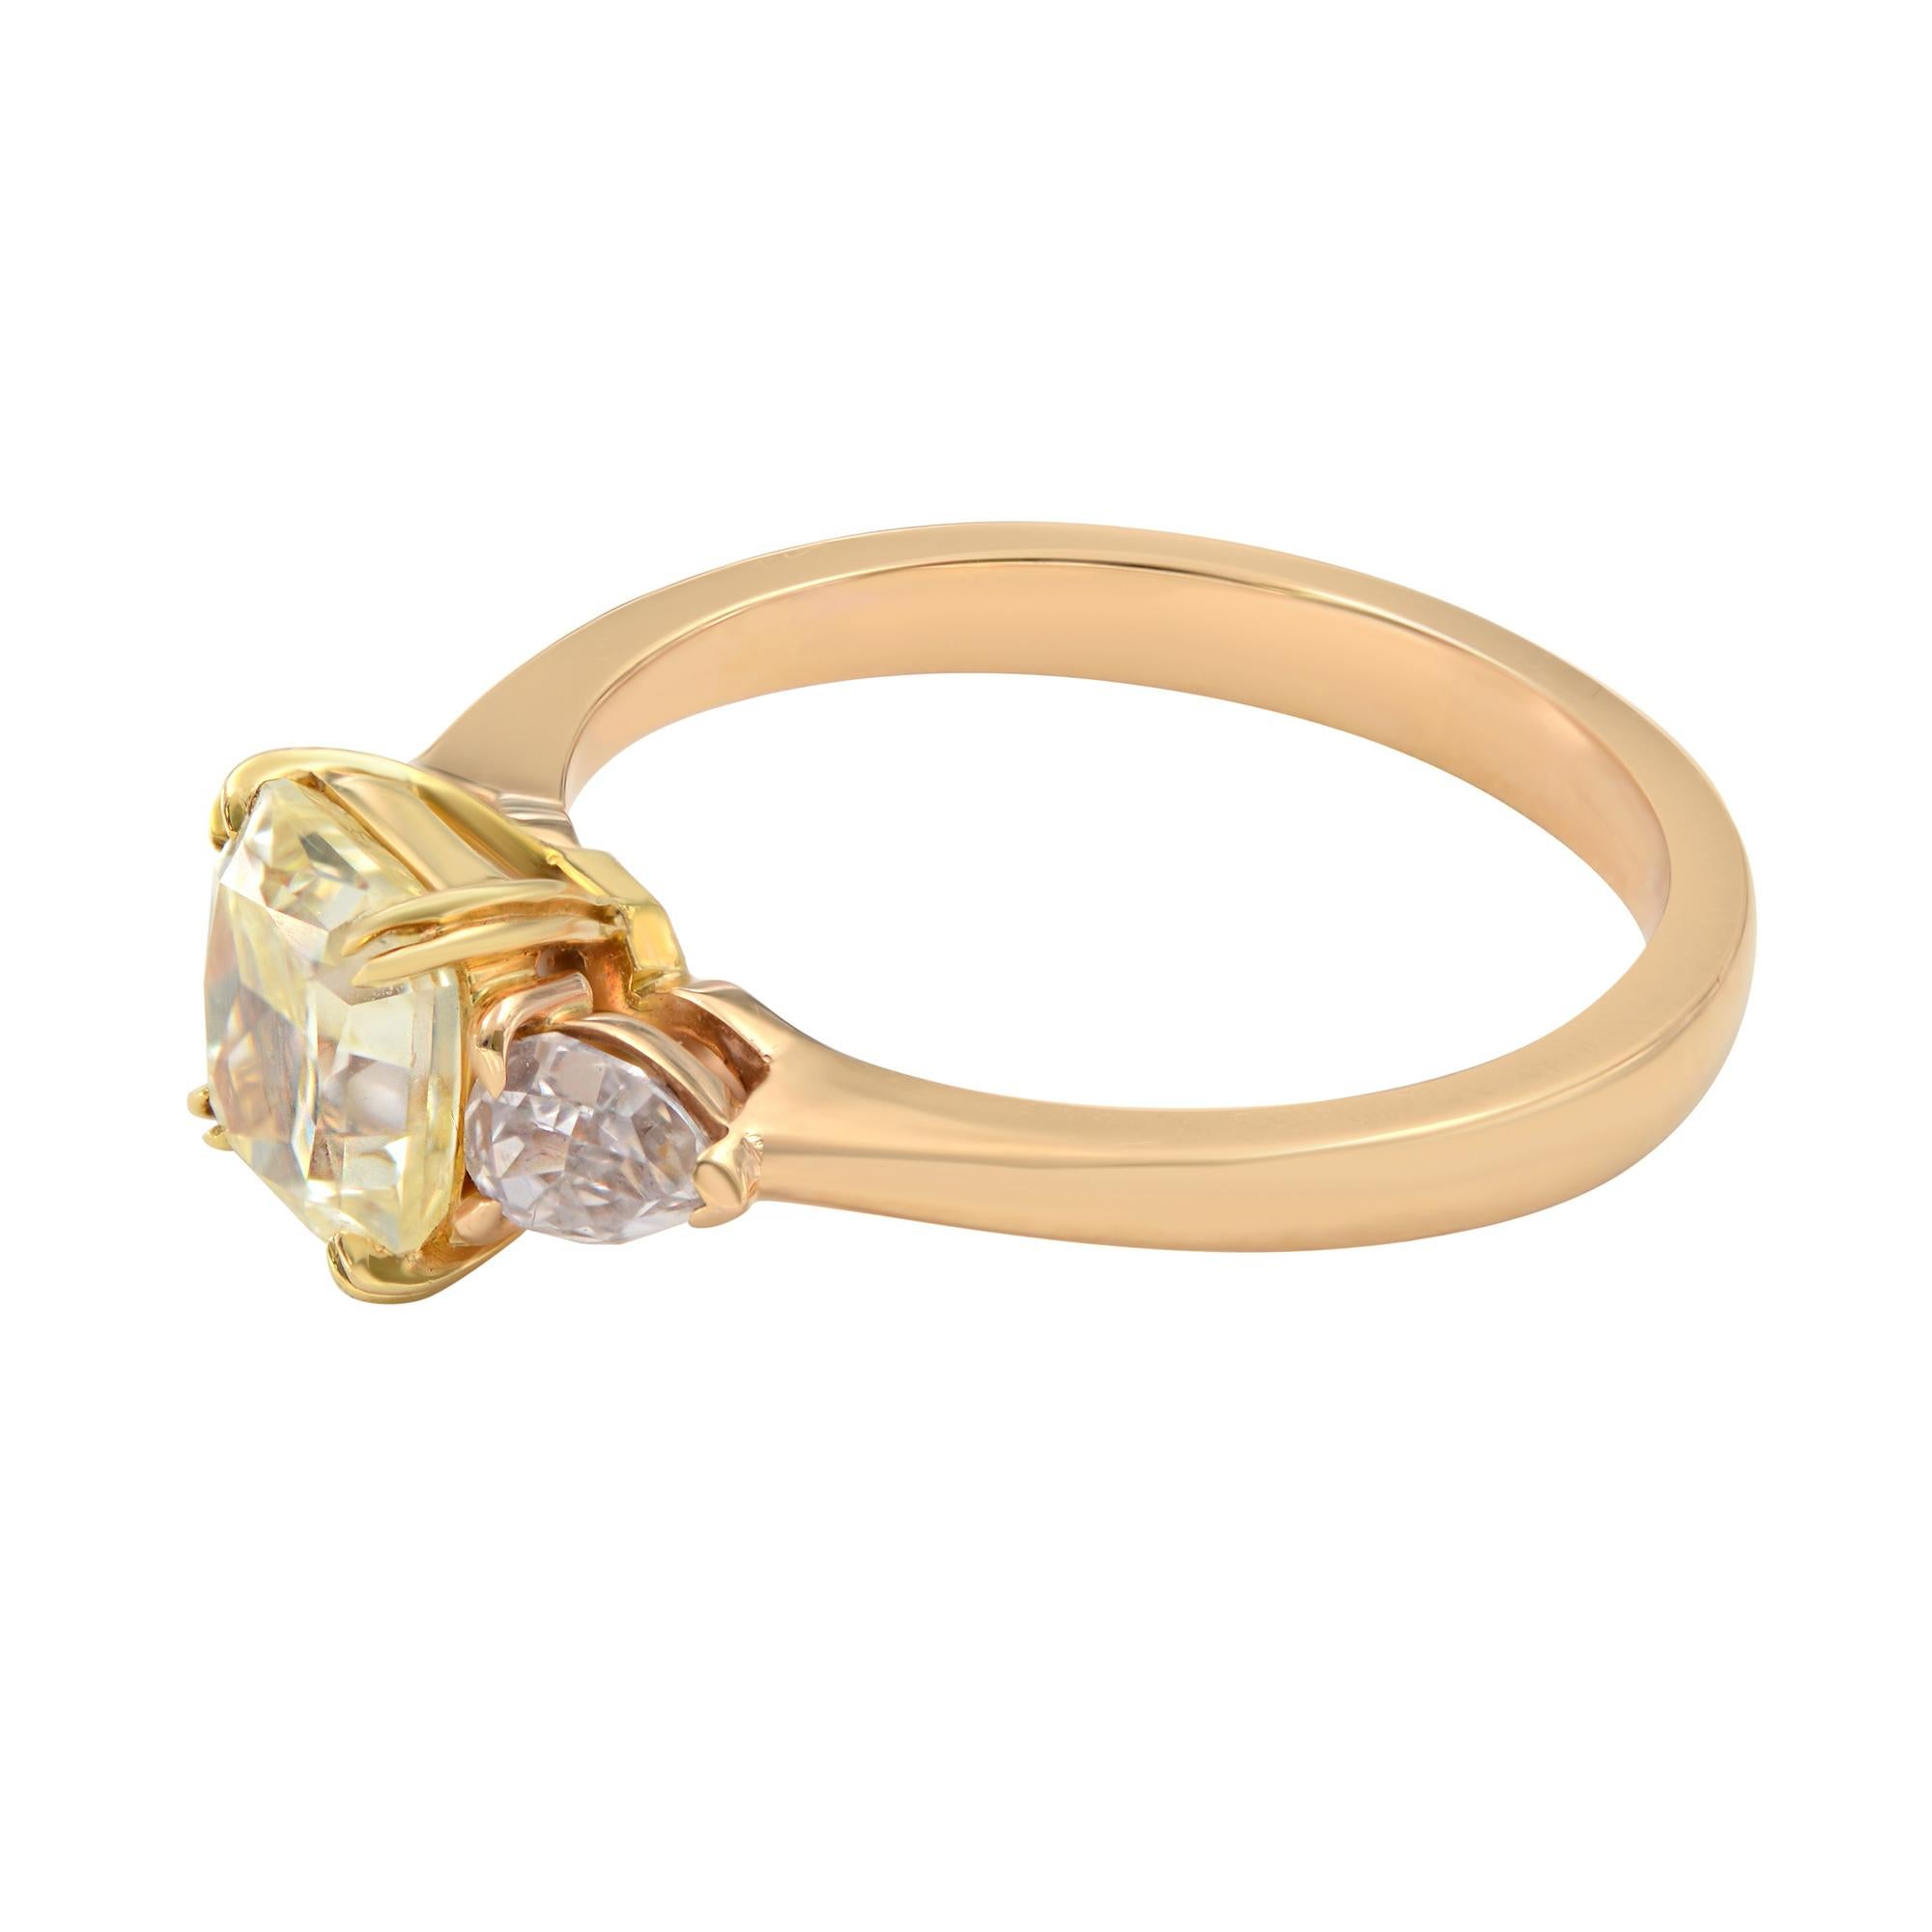 Rachel Koen 18K Yellow Gold Asscher and Pear Shaped Three-Stone Ring 1.37 Carat In New Condition For Sale In New York, NY